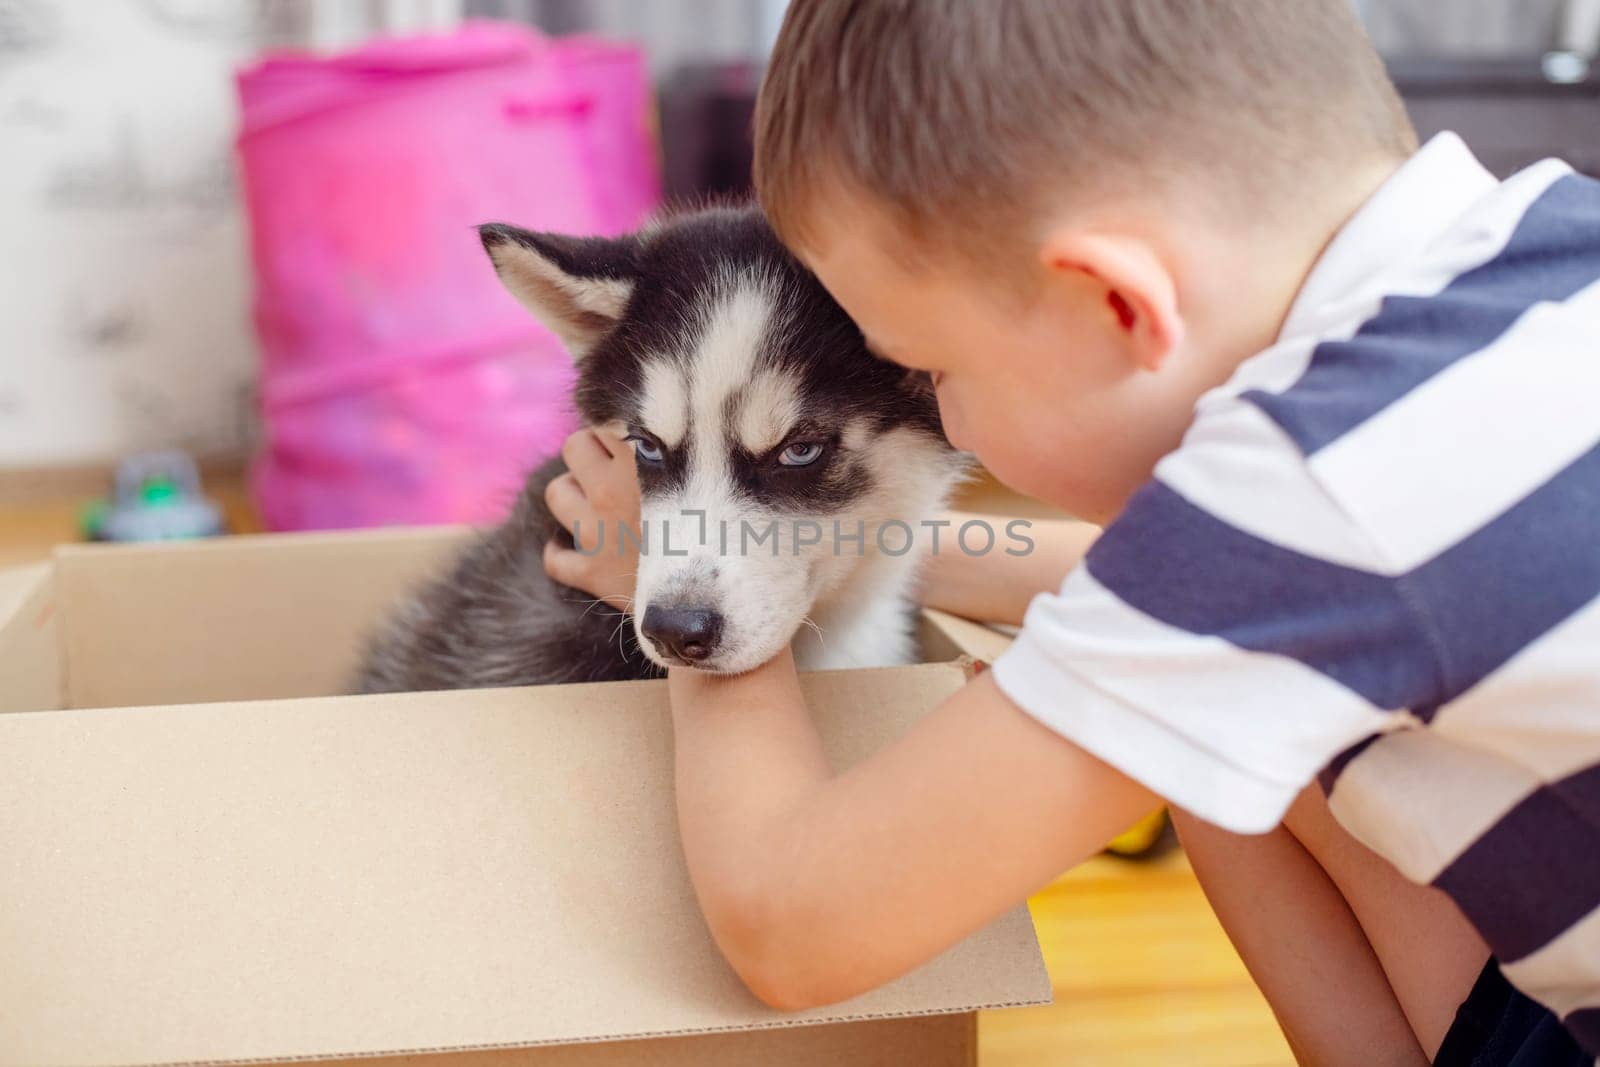 Kid gets out husky puppy from cardboard box at home. Child has birthday present.